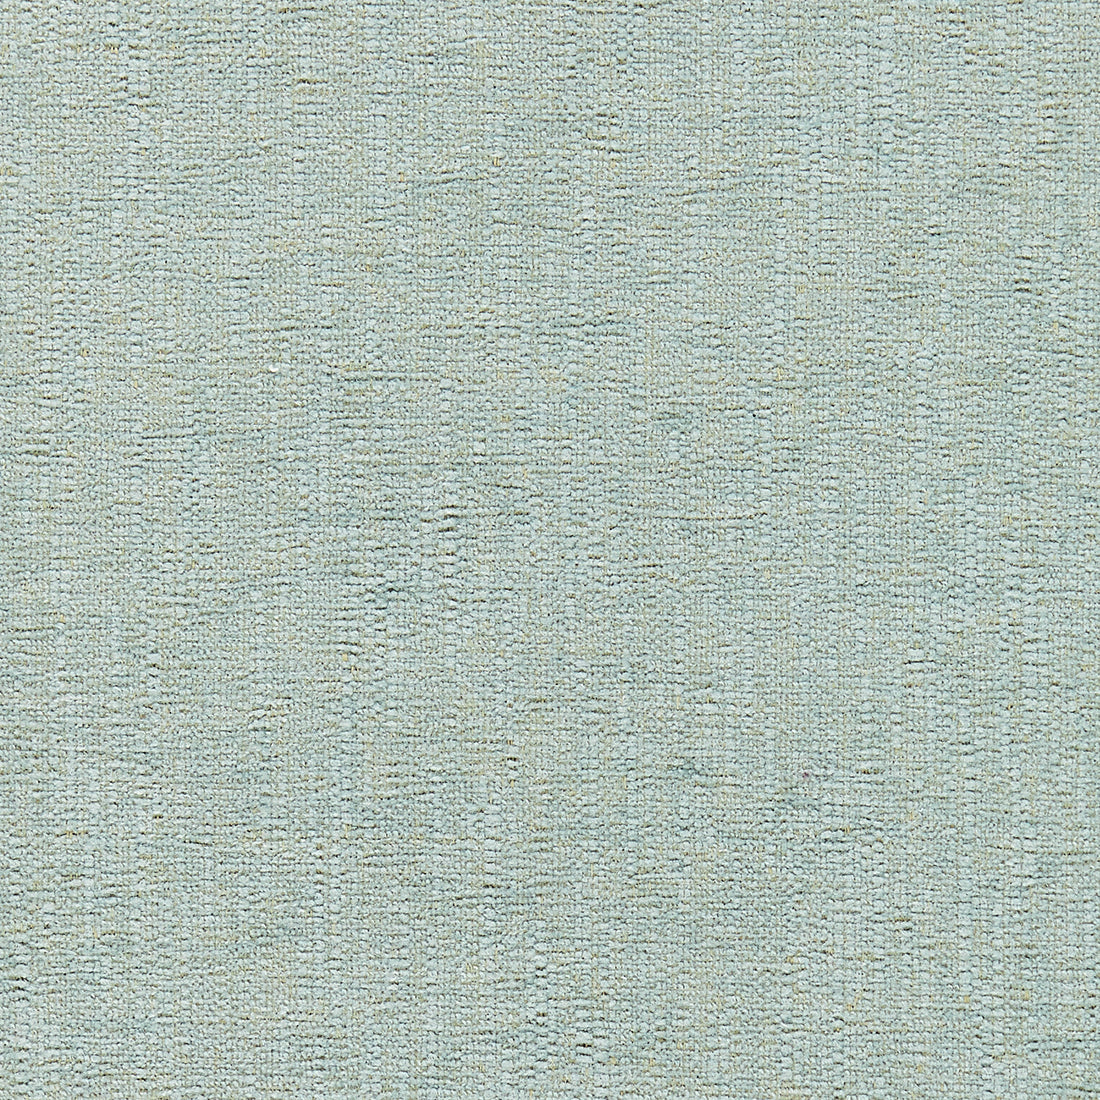 Cumulus fabric in fog color - pattern number W80282 - by Thibaut in the Kaleidoscope Fabrics collection